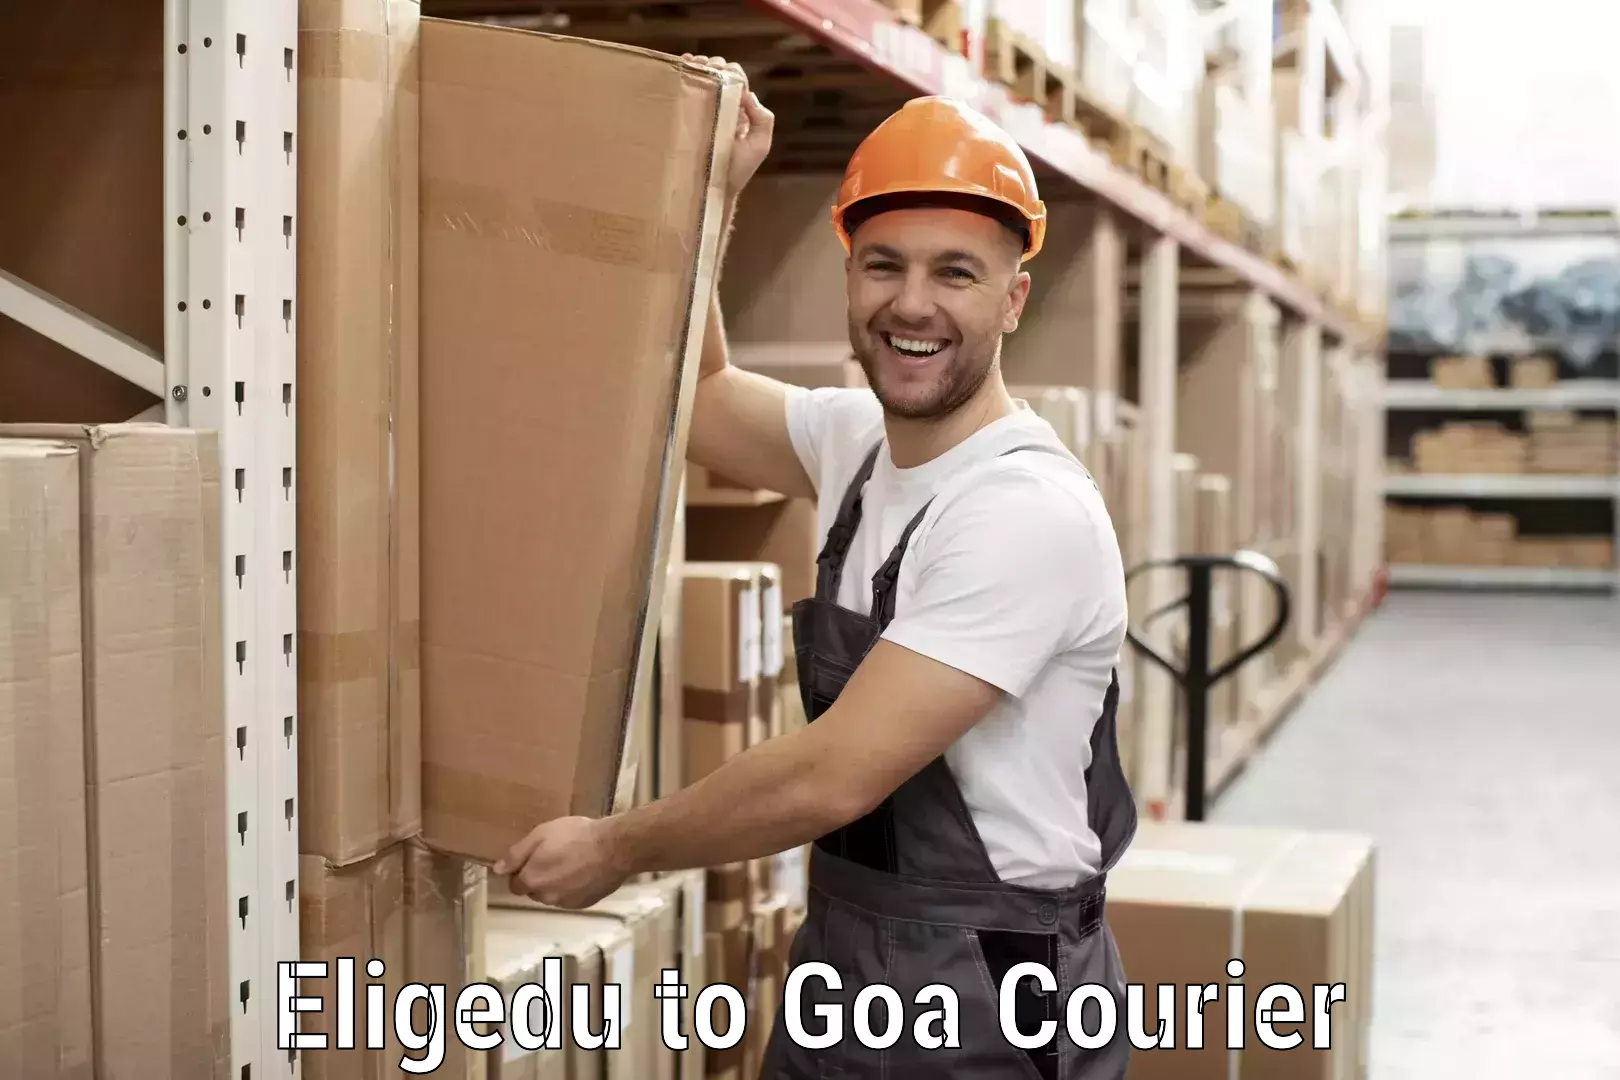 Holiday shipping services Eligedu to Goa